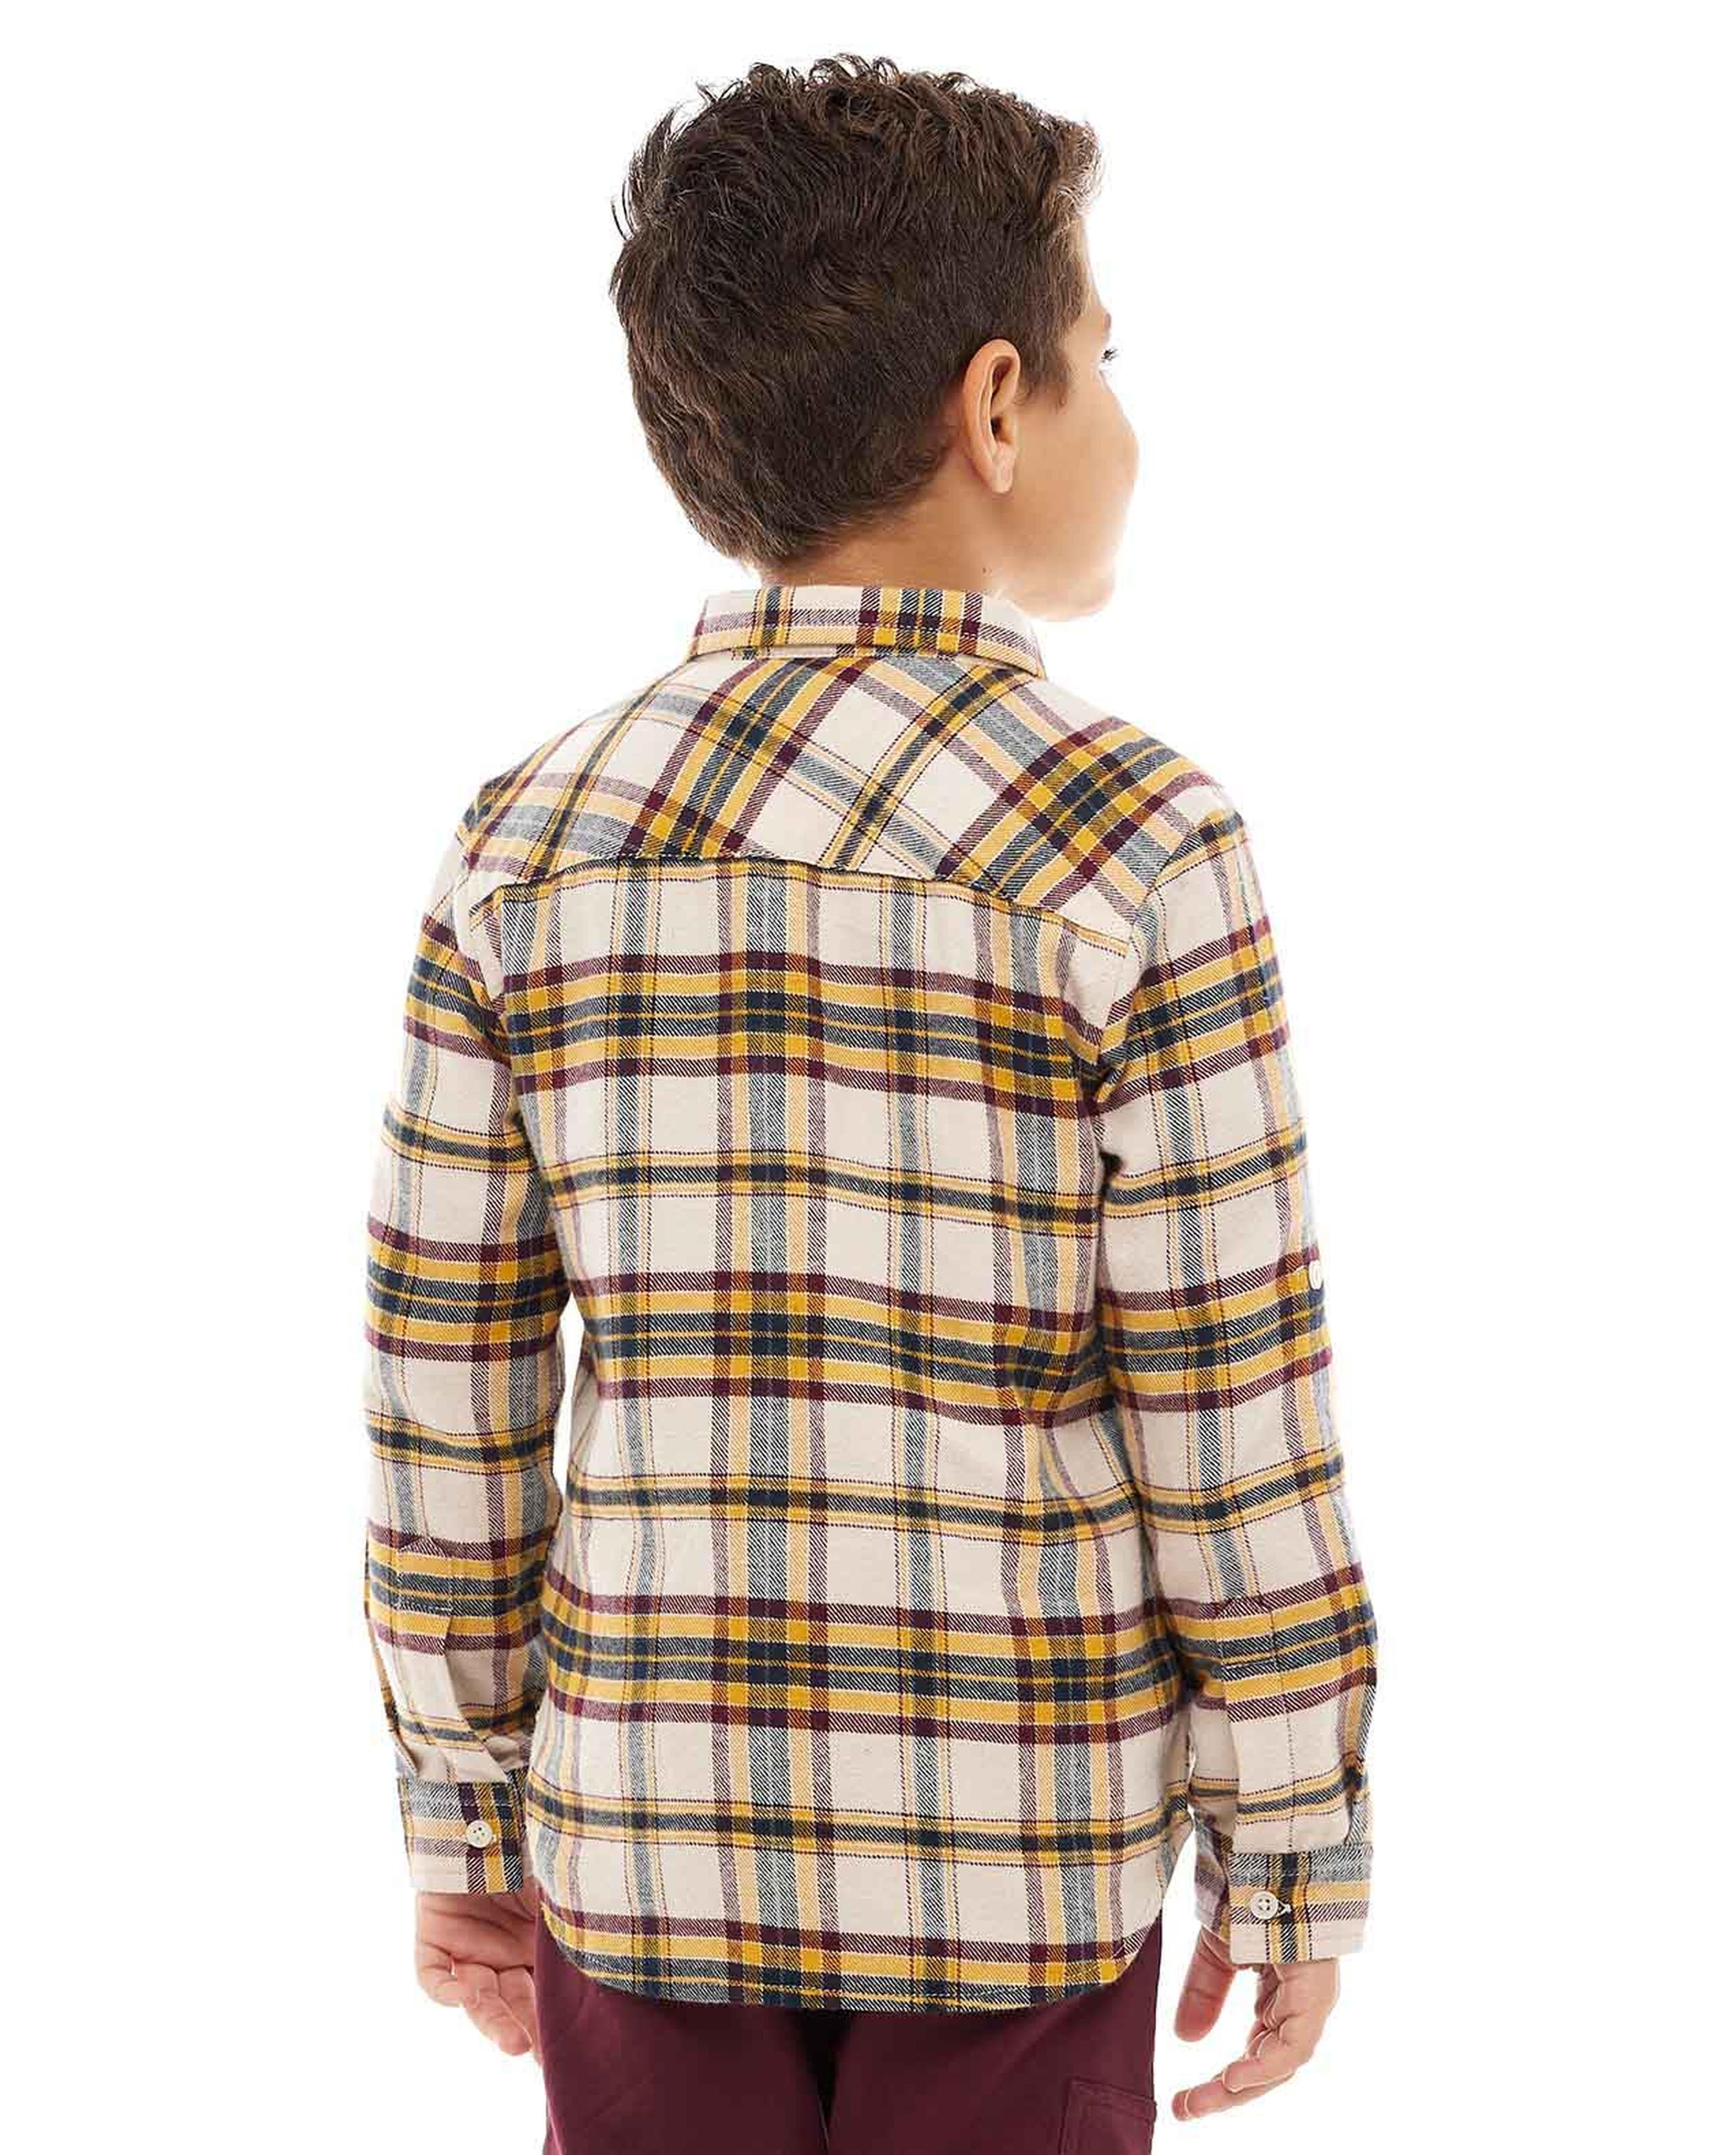 Plaid Shirt with Classic Collar and Long Sleeves